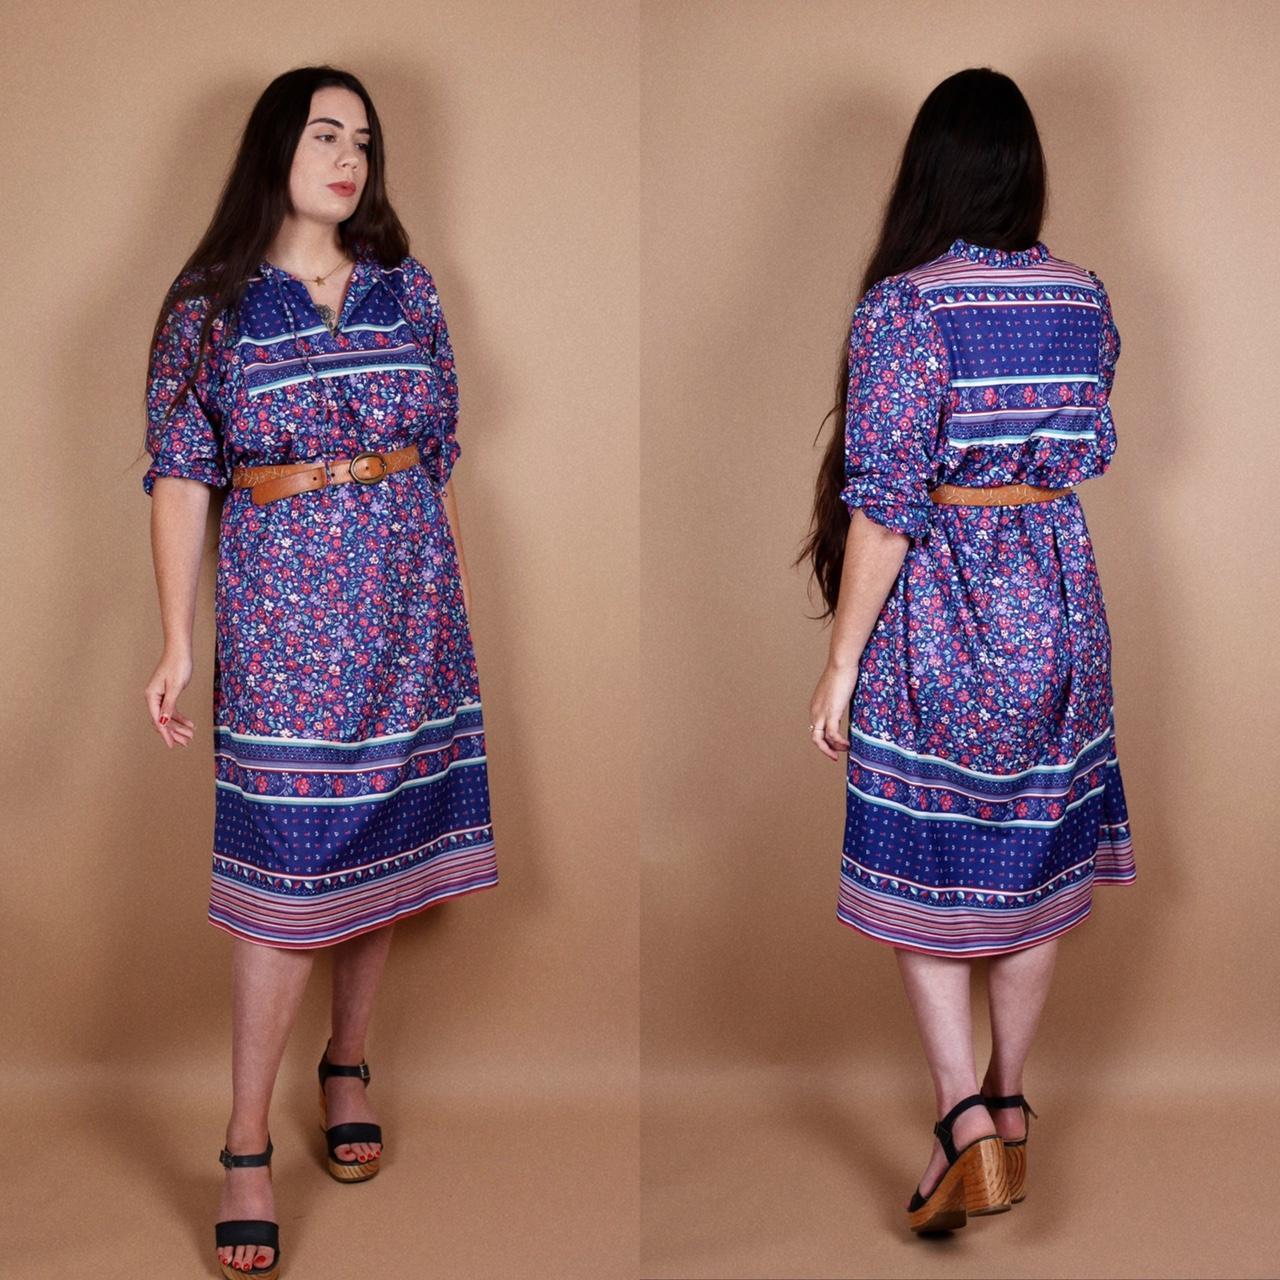 Product Image 2 - Floral Summer Peasant Dress

By: Lorac